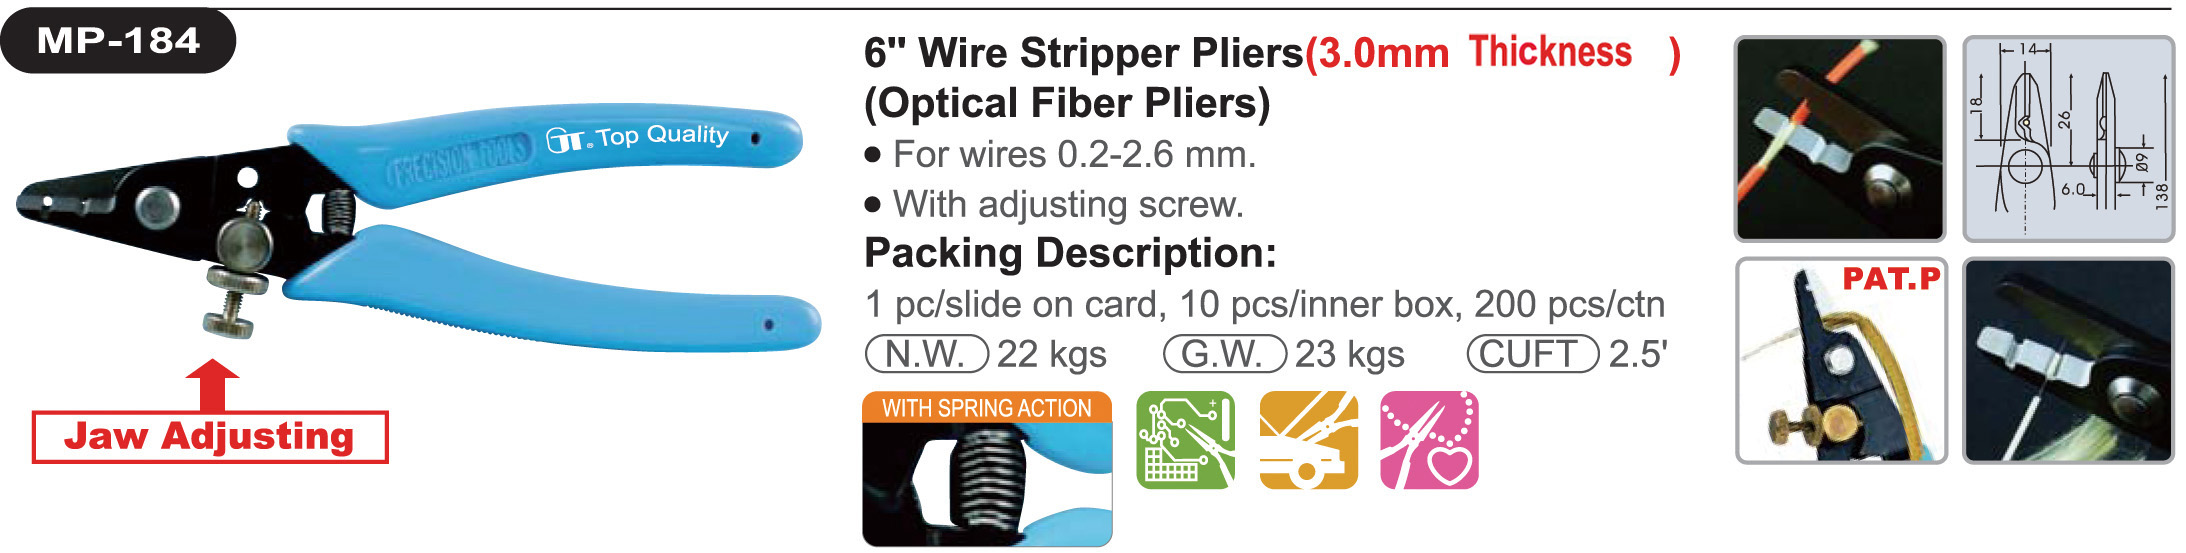 proimages/product/pliers/wire_strippers/Wire_Stripper_for_fibre_optics/MP-184/MP-184.jpg